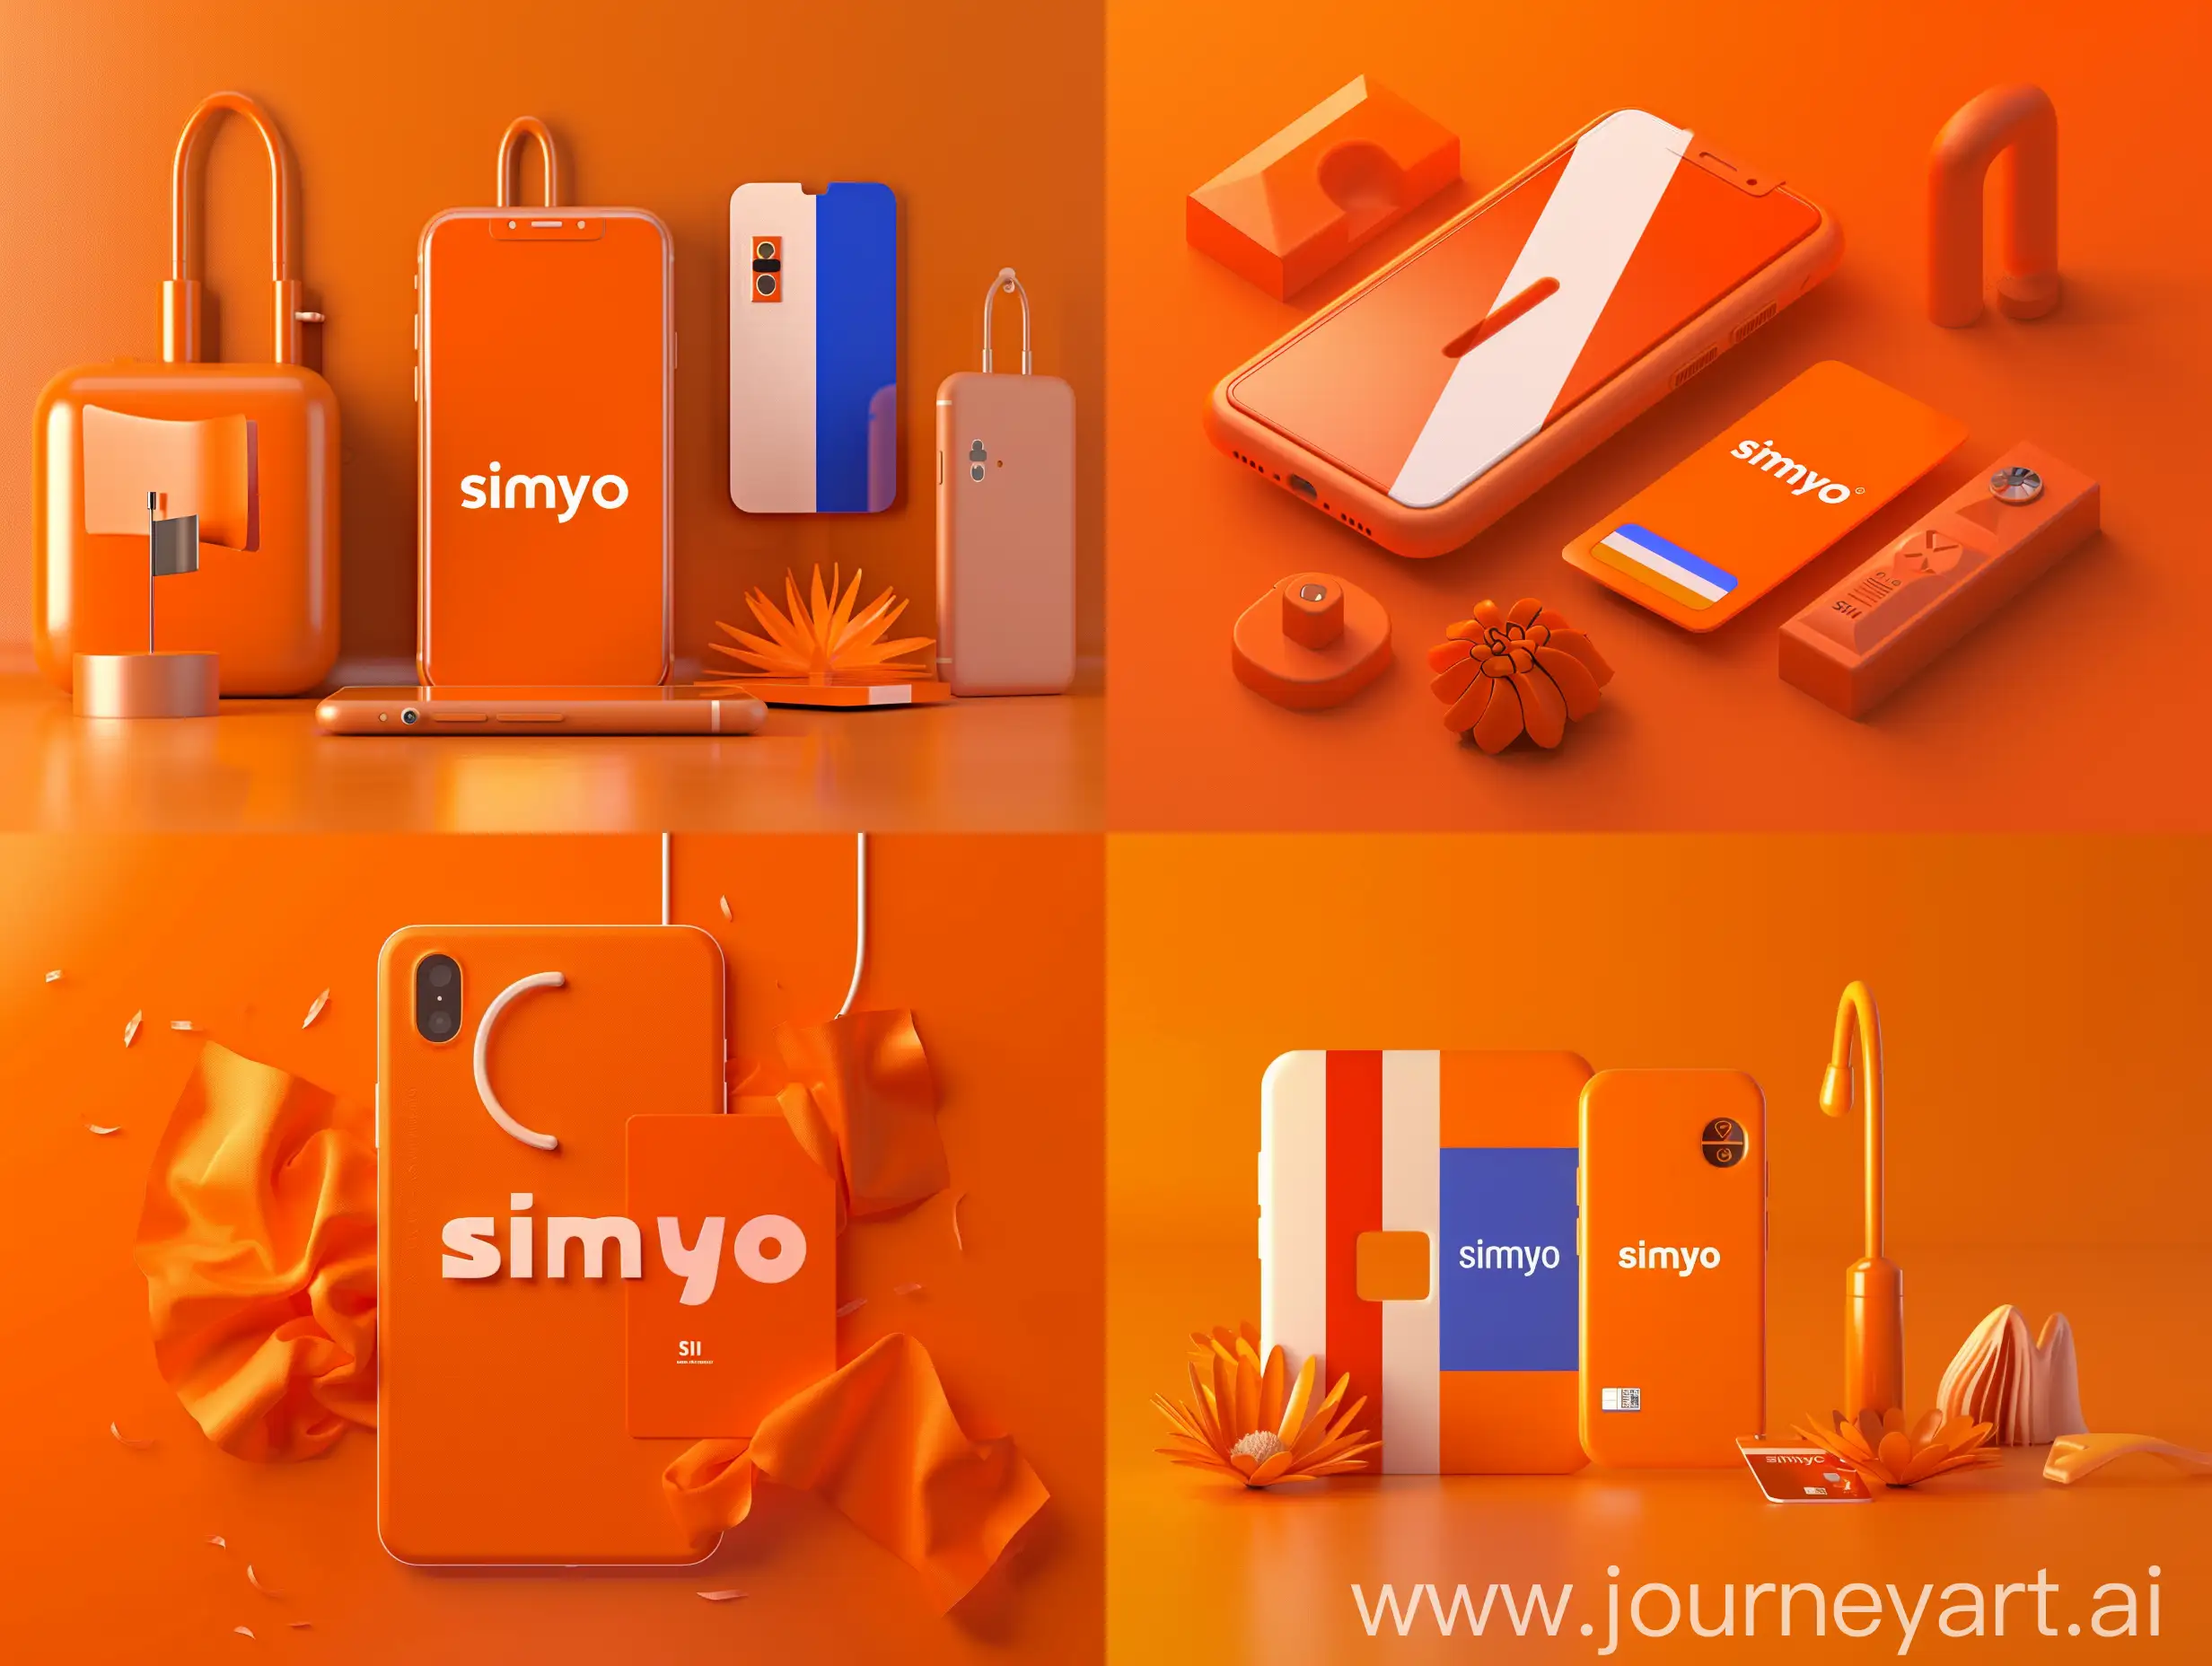 Innovative-Simyo-Mobile-Network-Technology-with-Dutch-Flag-Elements